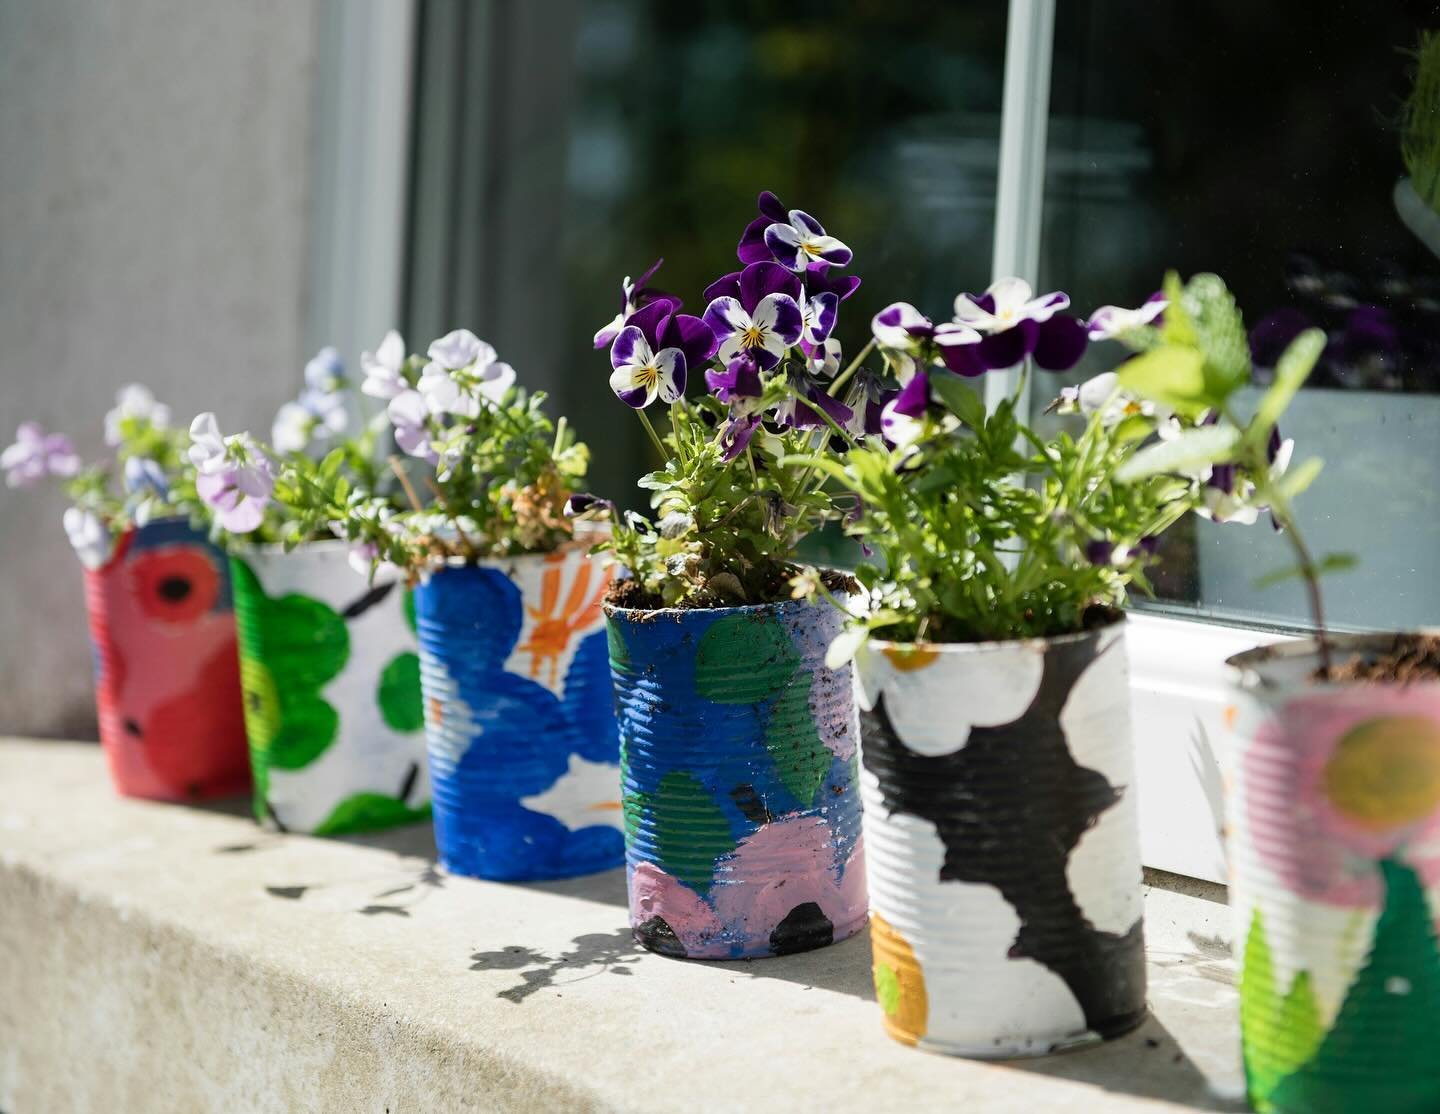 Spring Crafts for Kids That Won&rsquo;t Drive You Bonkers

The kids will get to unleash their inner Picasso, and you end up with some adorable mini spring blooms to dot around the house.

So gather up those recyclables, bust out the glitter and googl